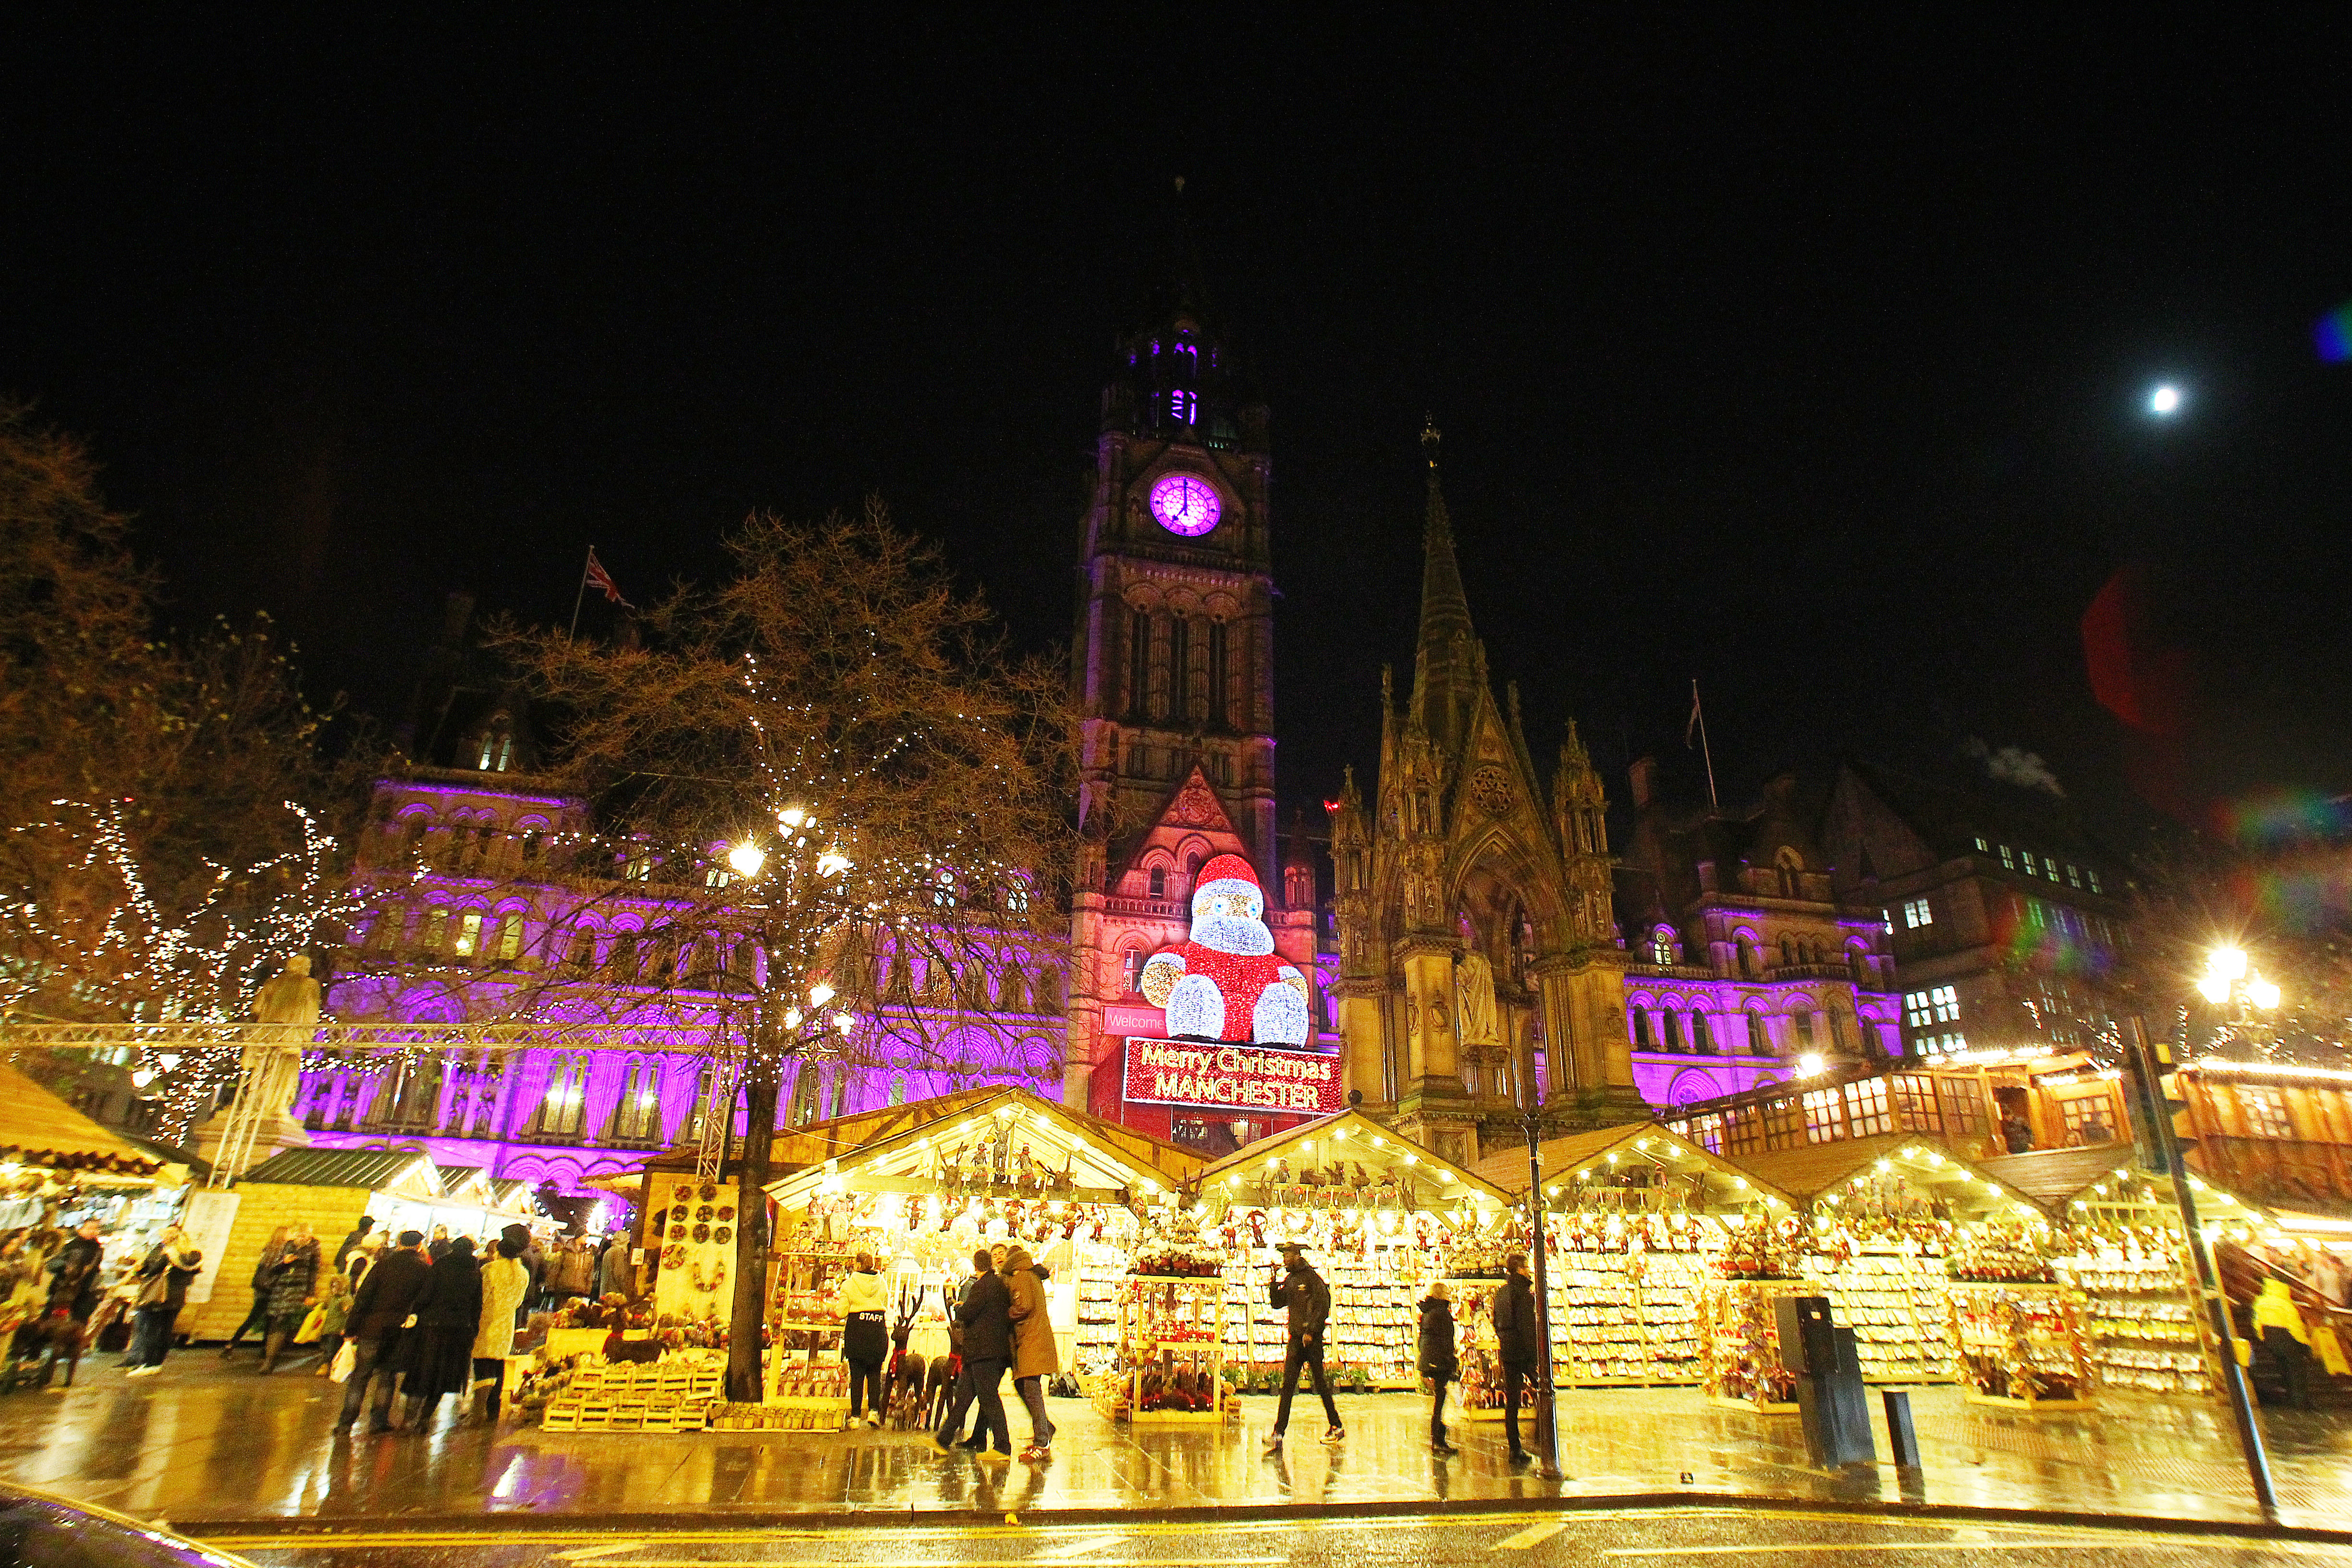 The Manchester Christmas Markets